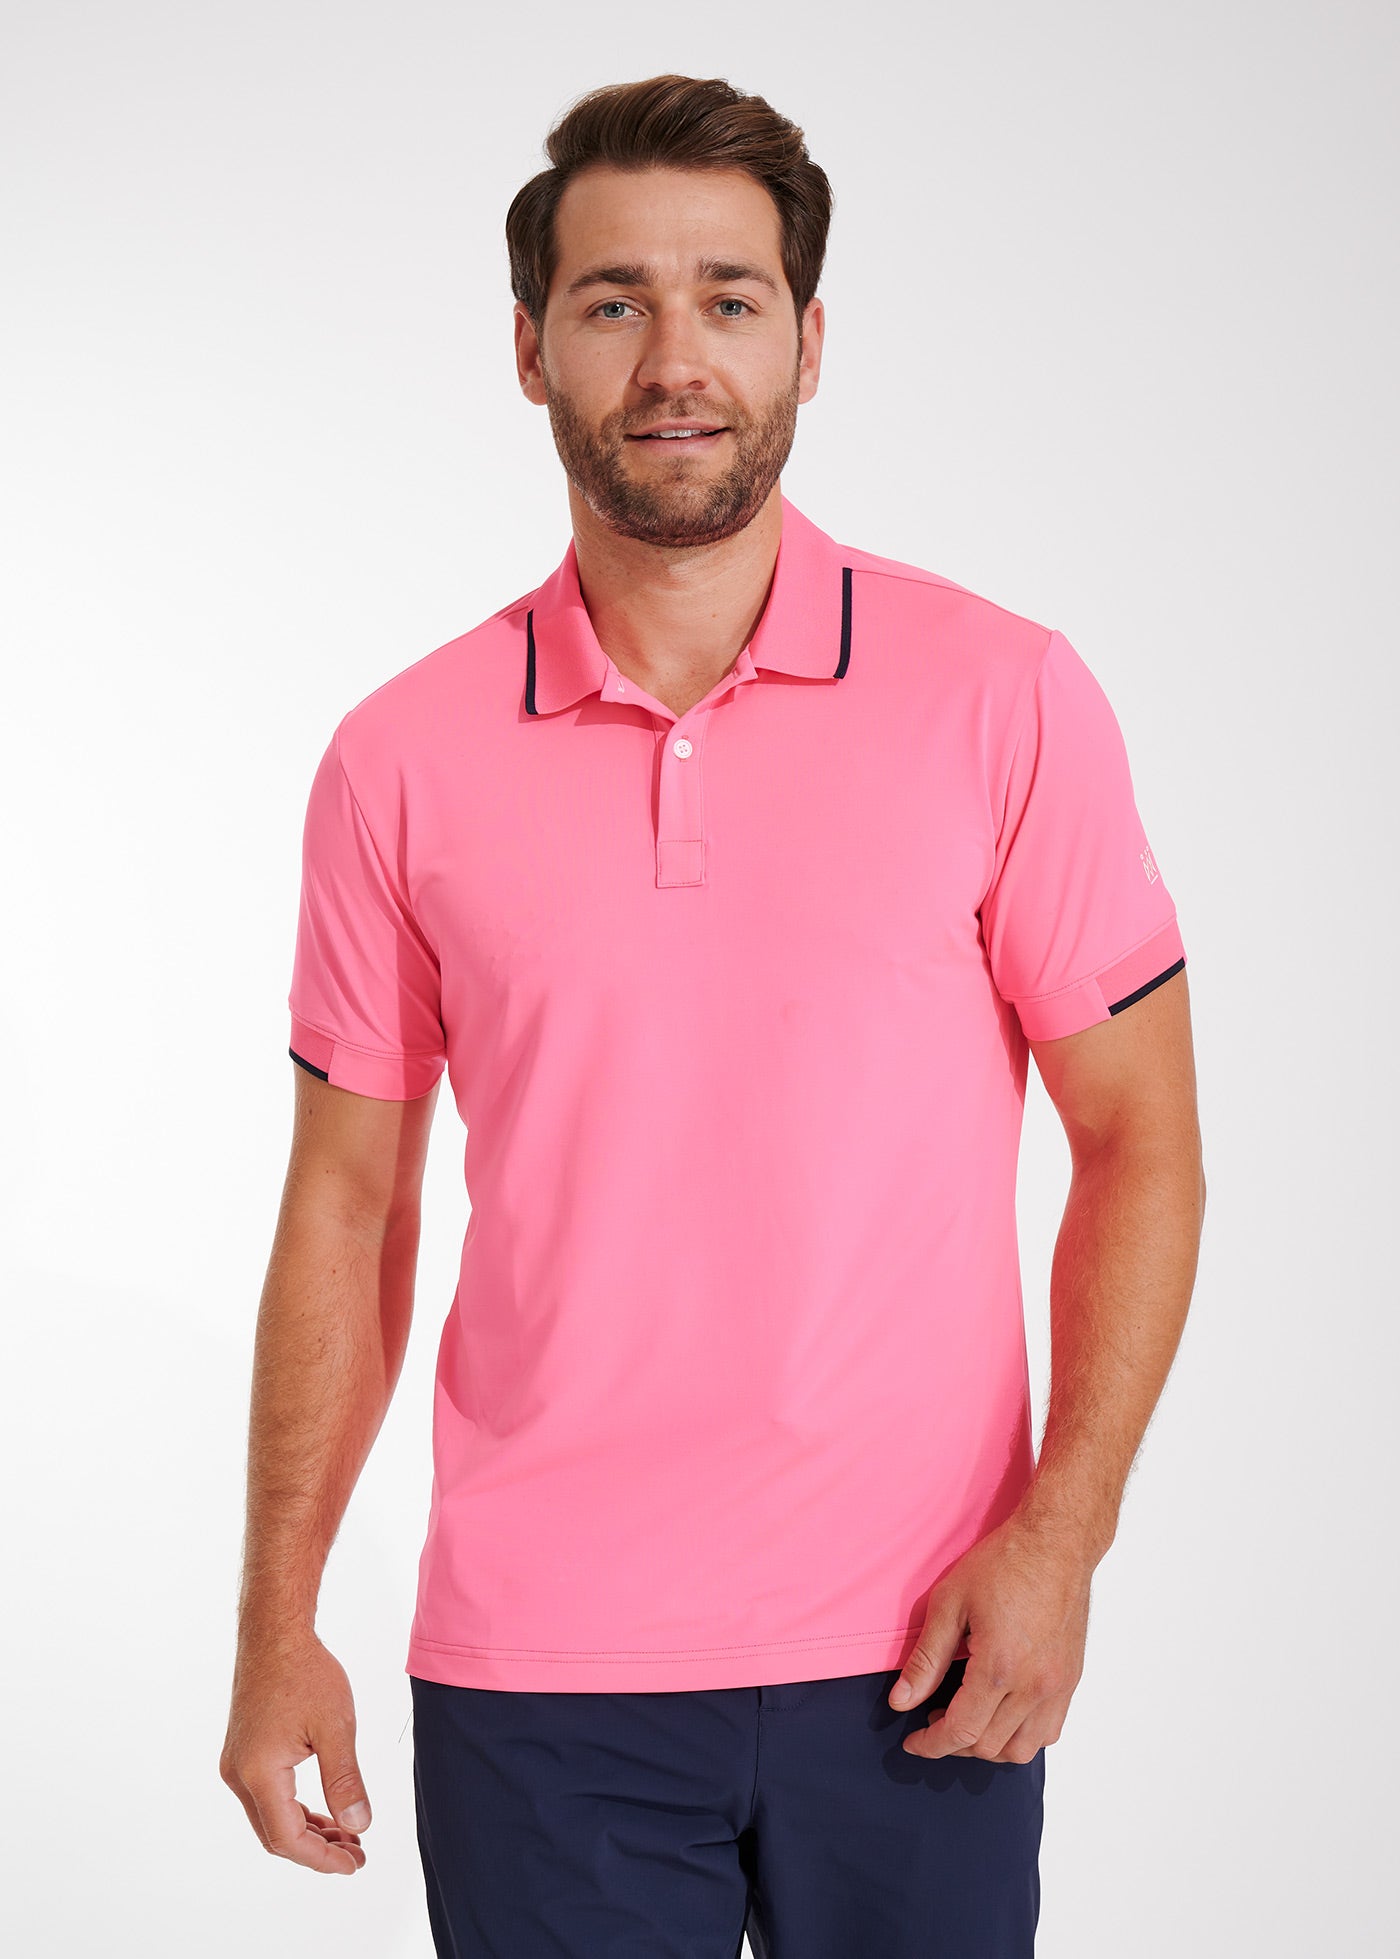 Swet Tailor - Performance Polo Pink